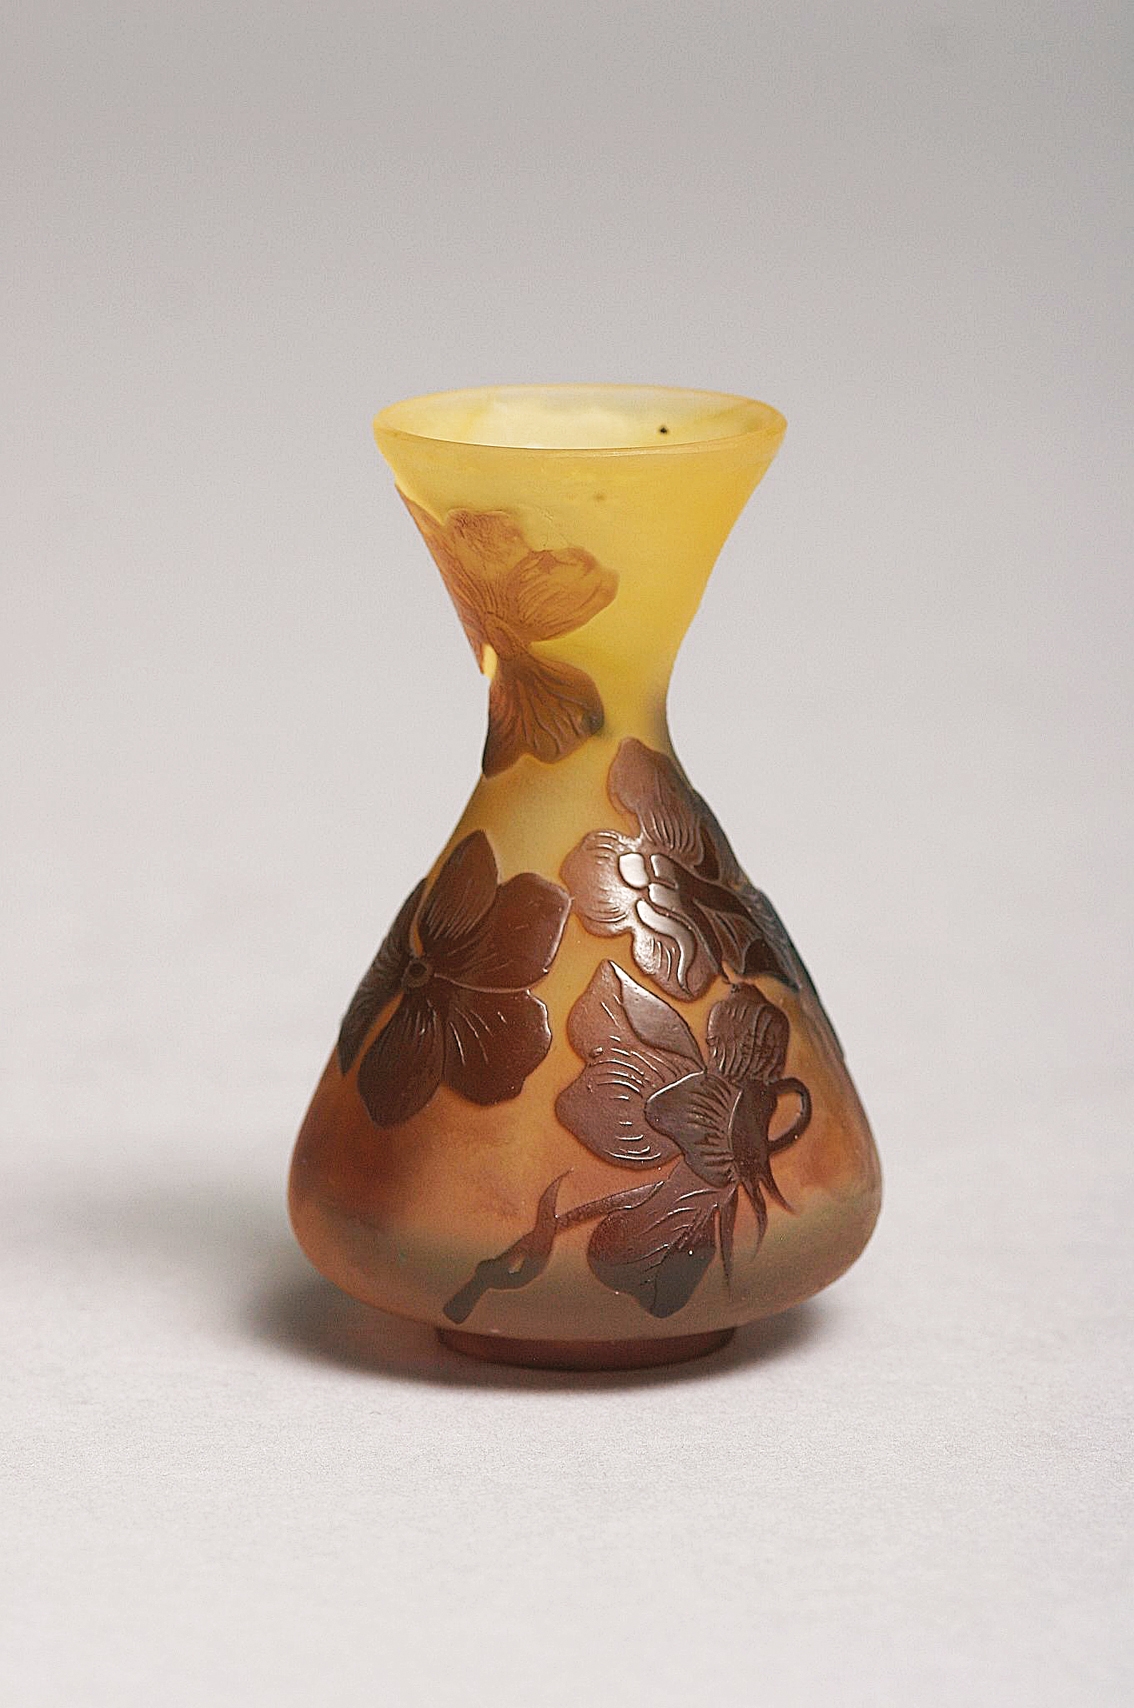 A small vase decorated with flowers